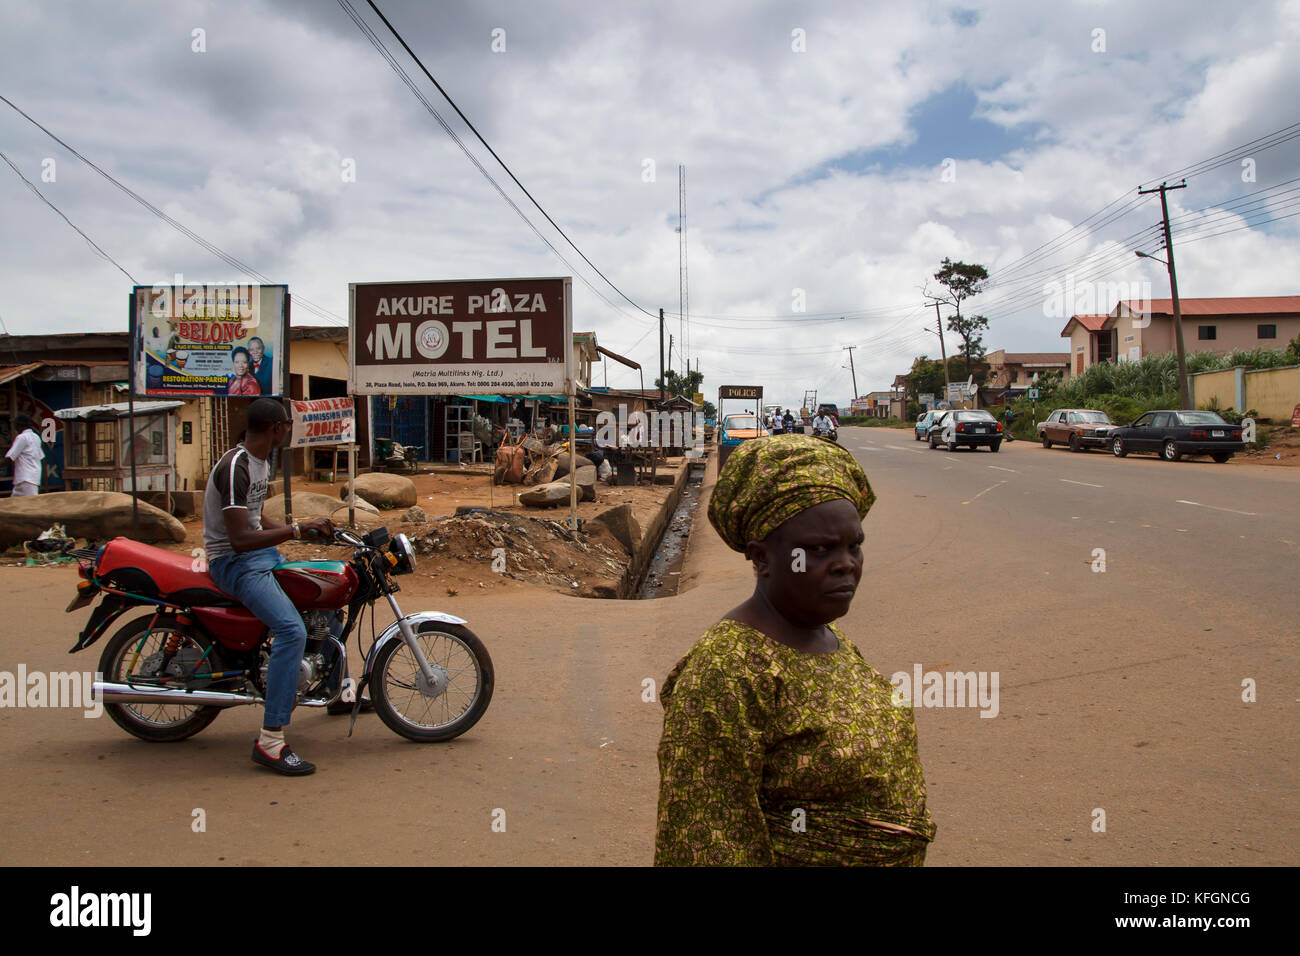 Nigerian man and woman in local dress in the street in the city of Akure in Ondo state, Nigeria Stock Photo